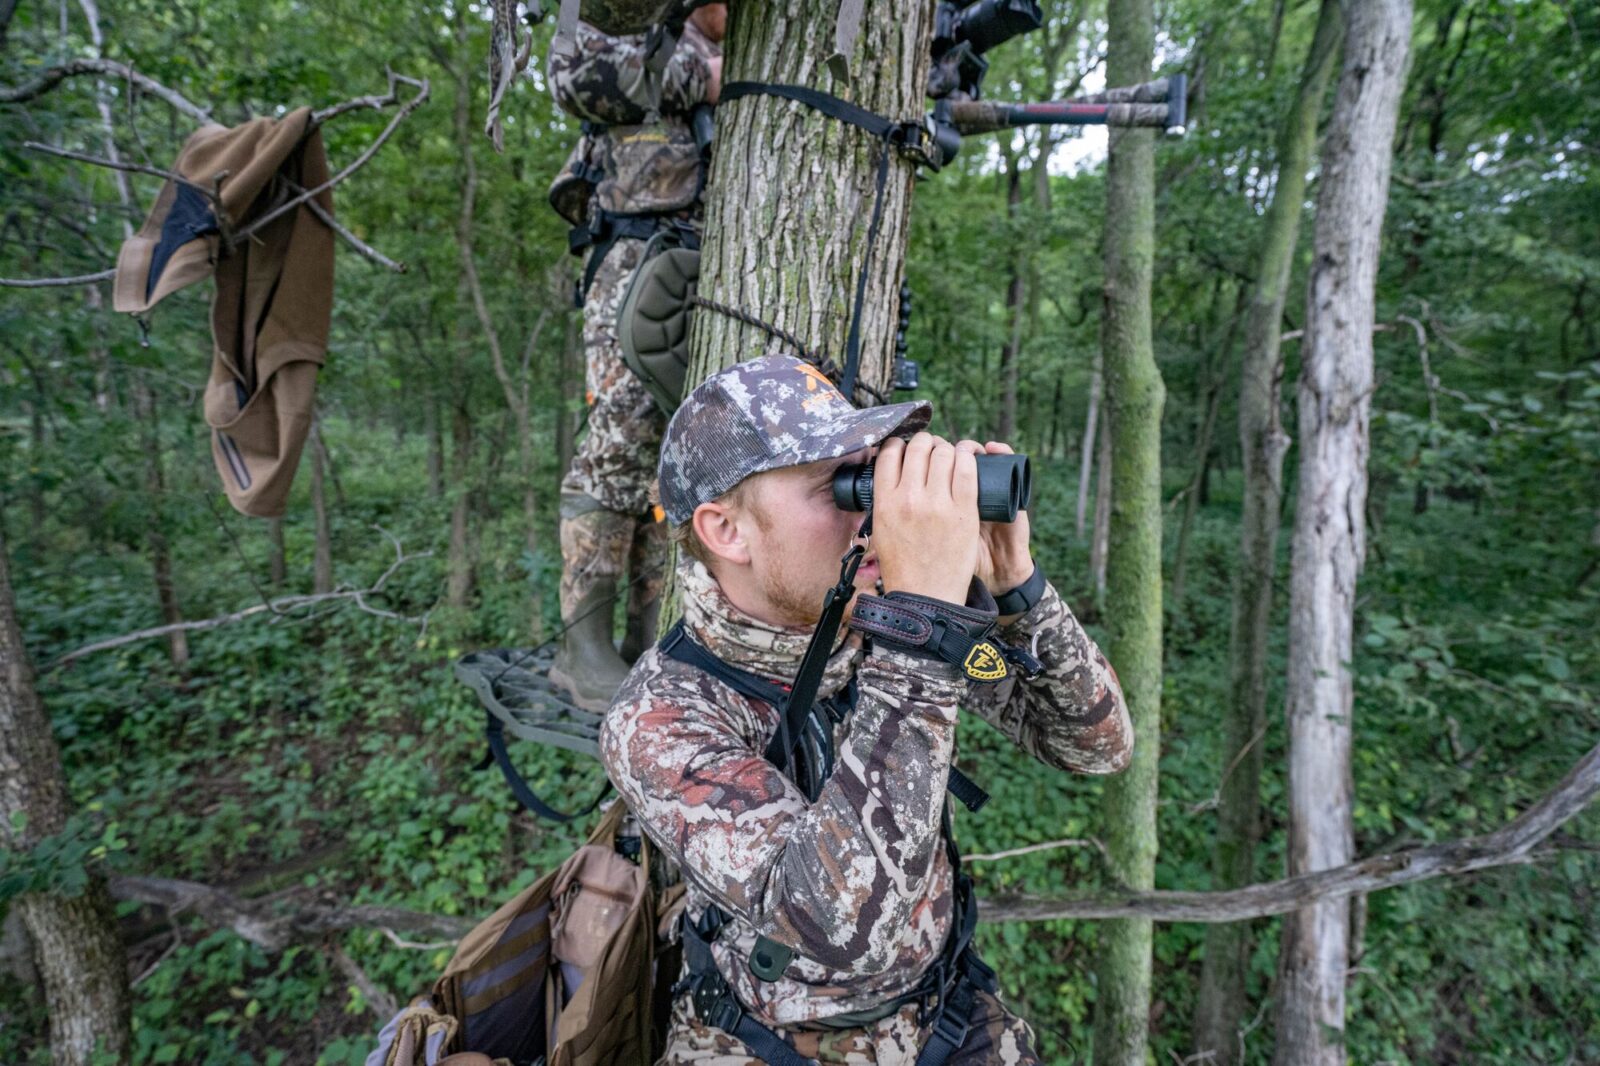 Get out to your tree stands faster with onX Hunt waypoints.